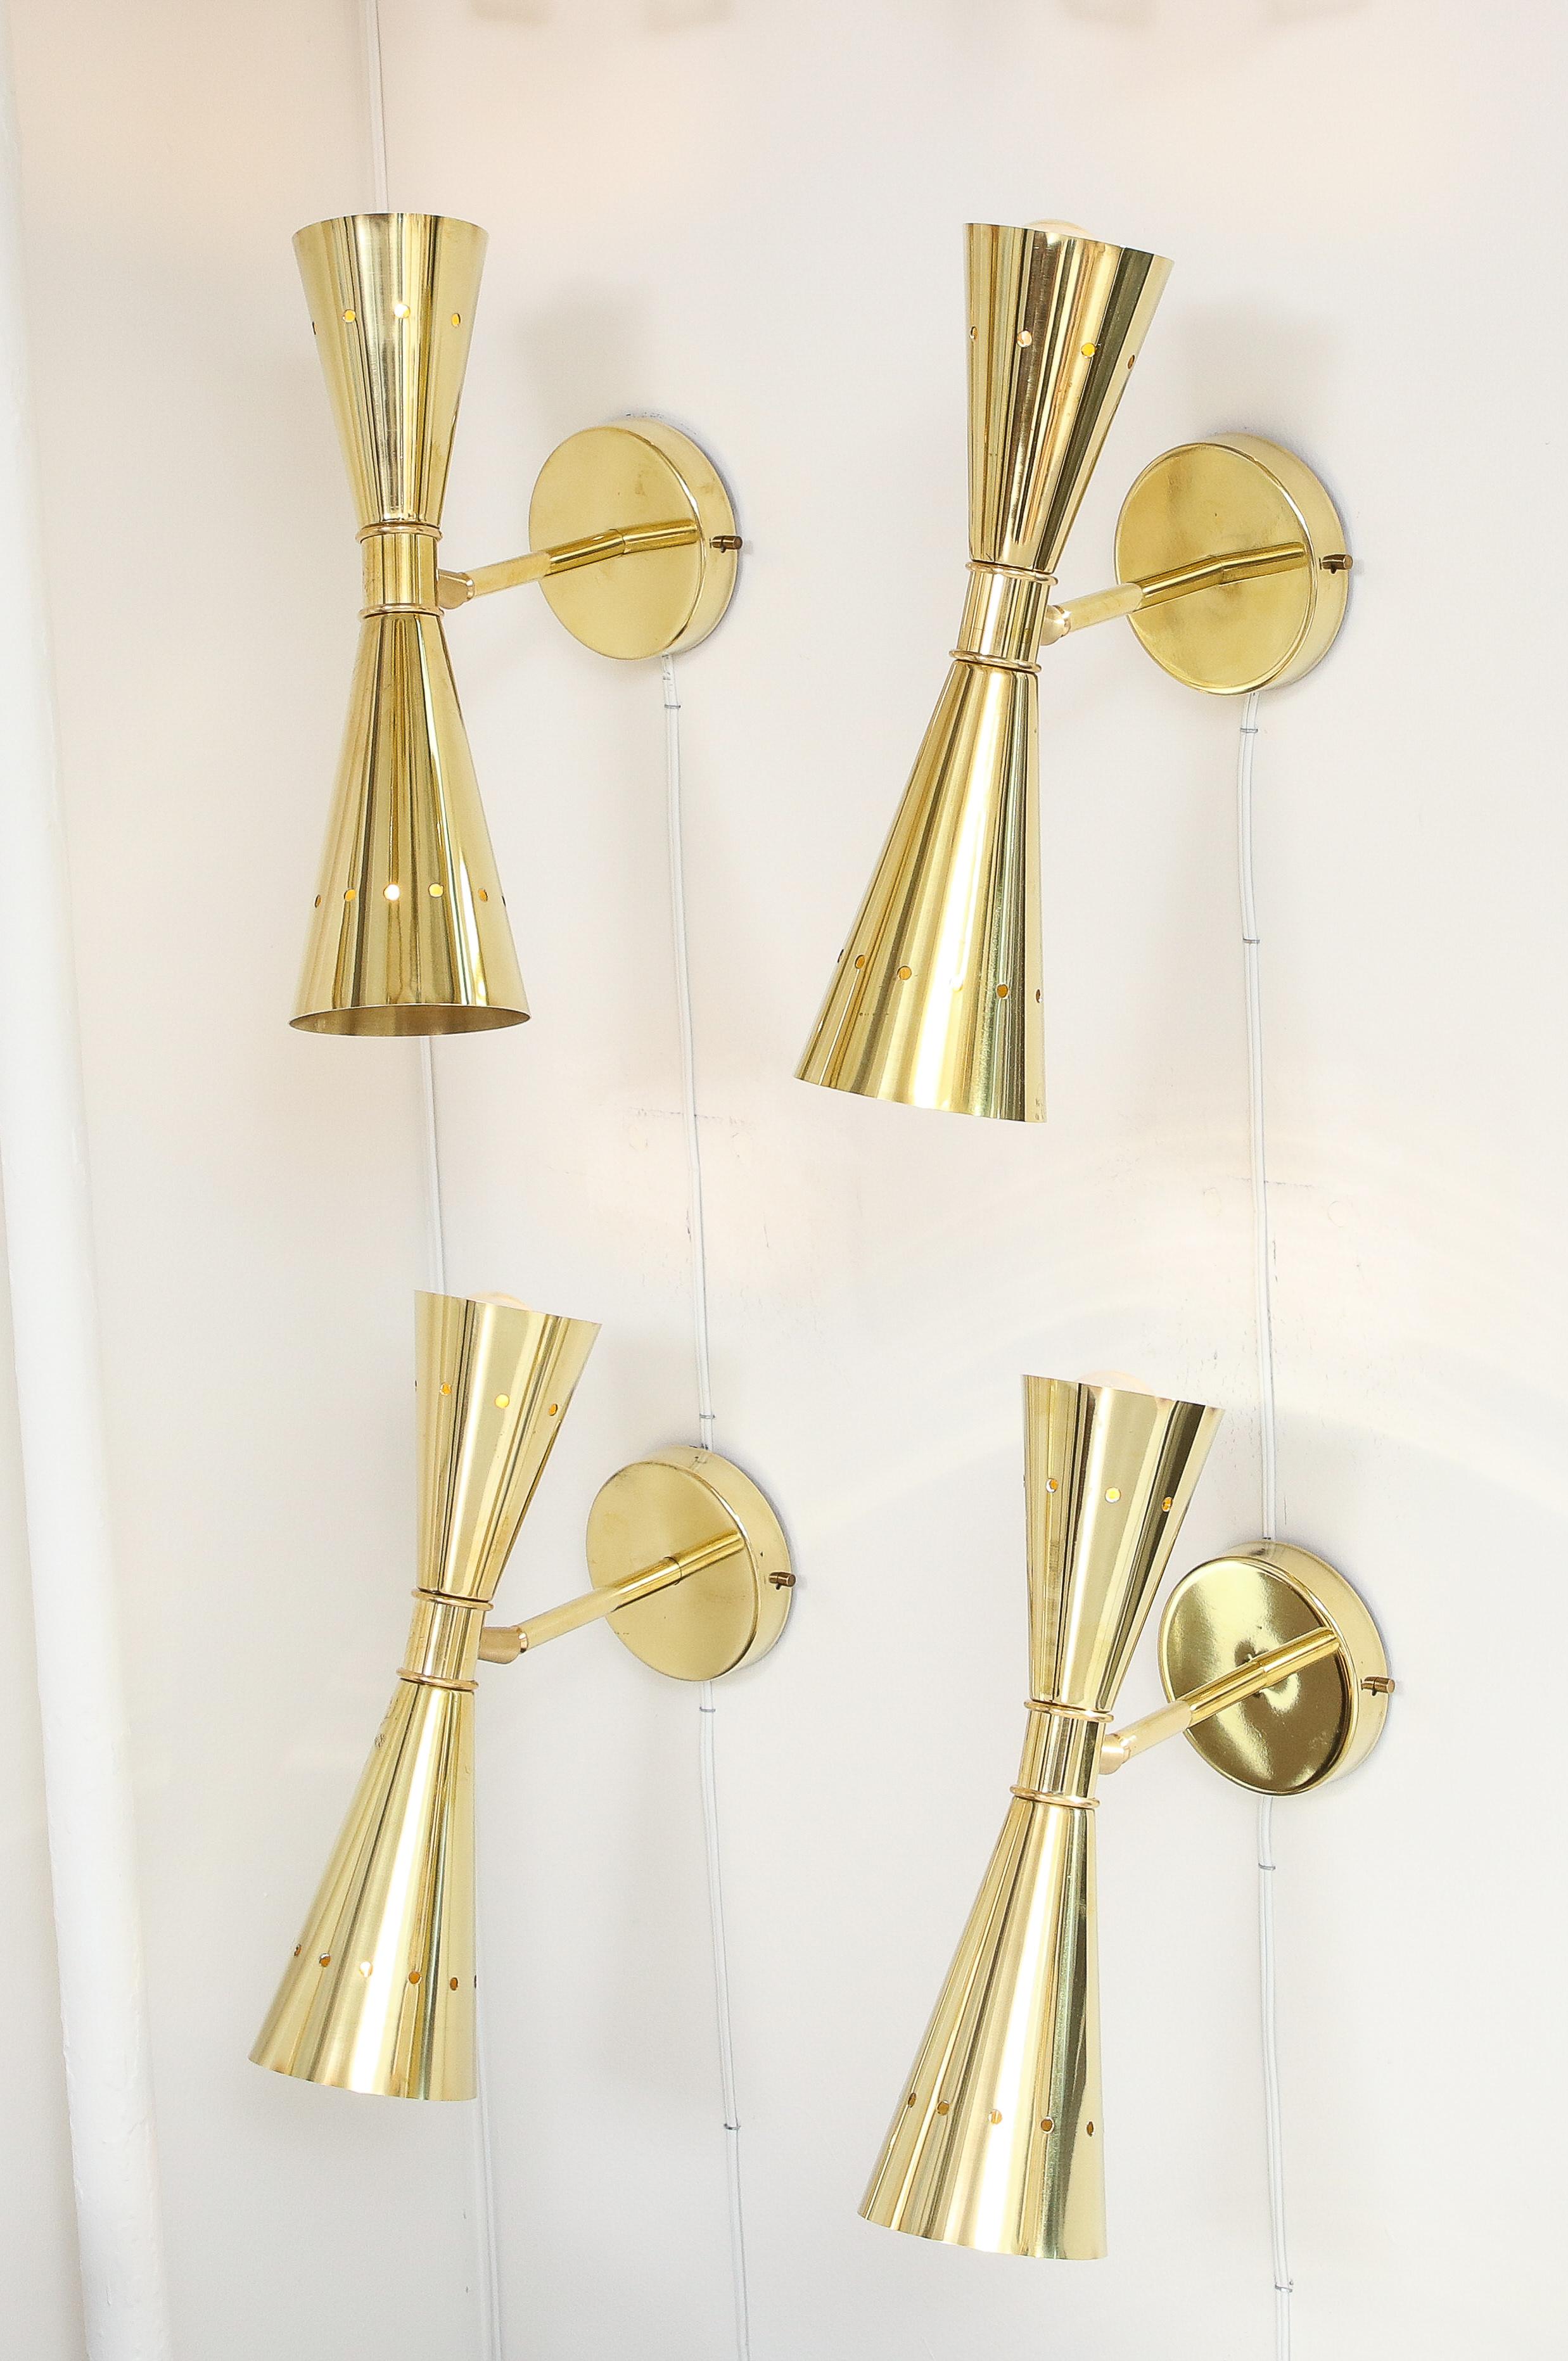 Set of Four Modernist Brass Double Cone Wall Lights or Sconces, Italy 2022 For Sale 1